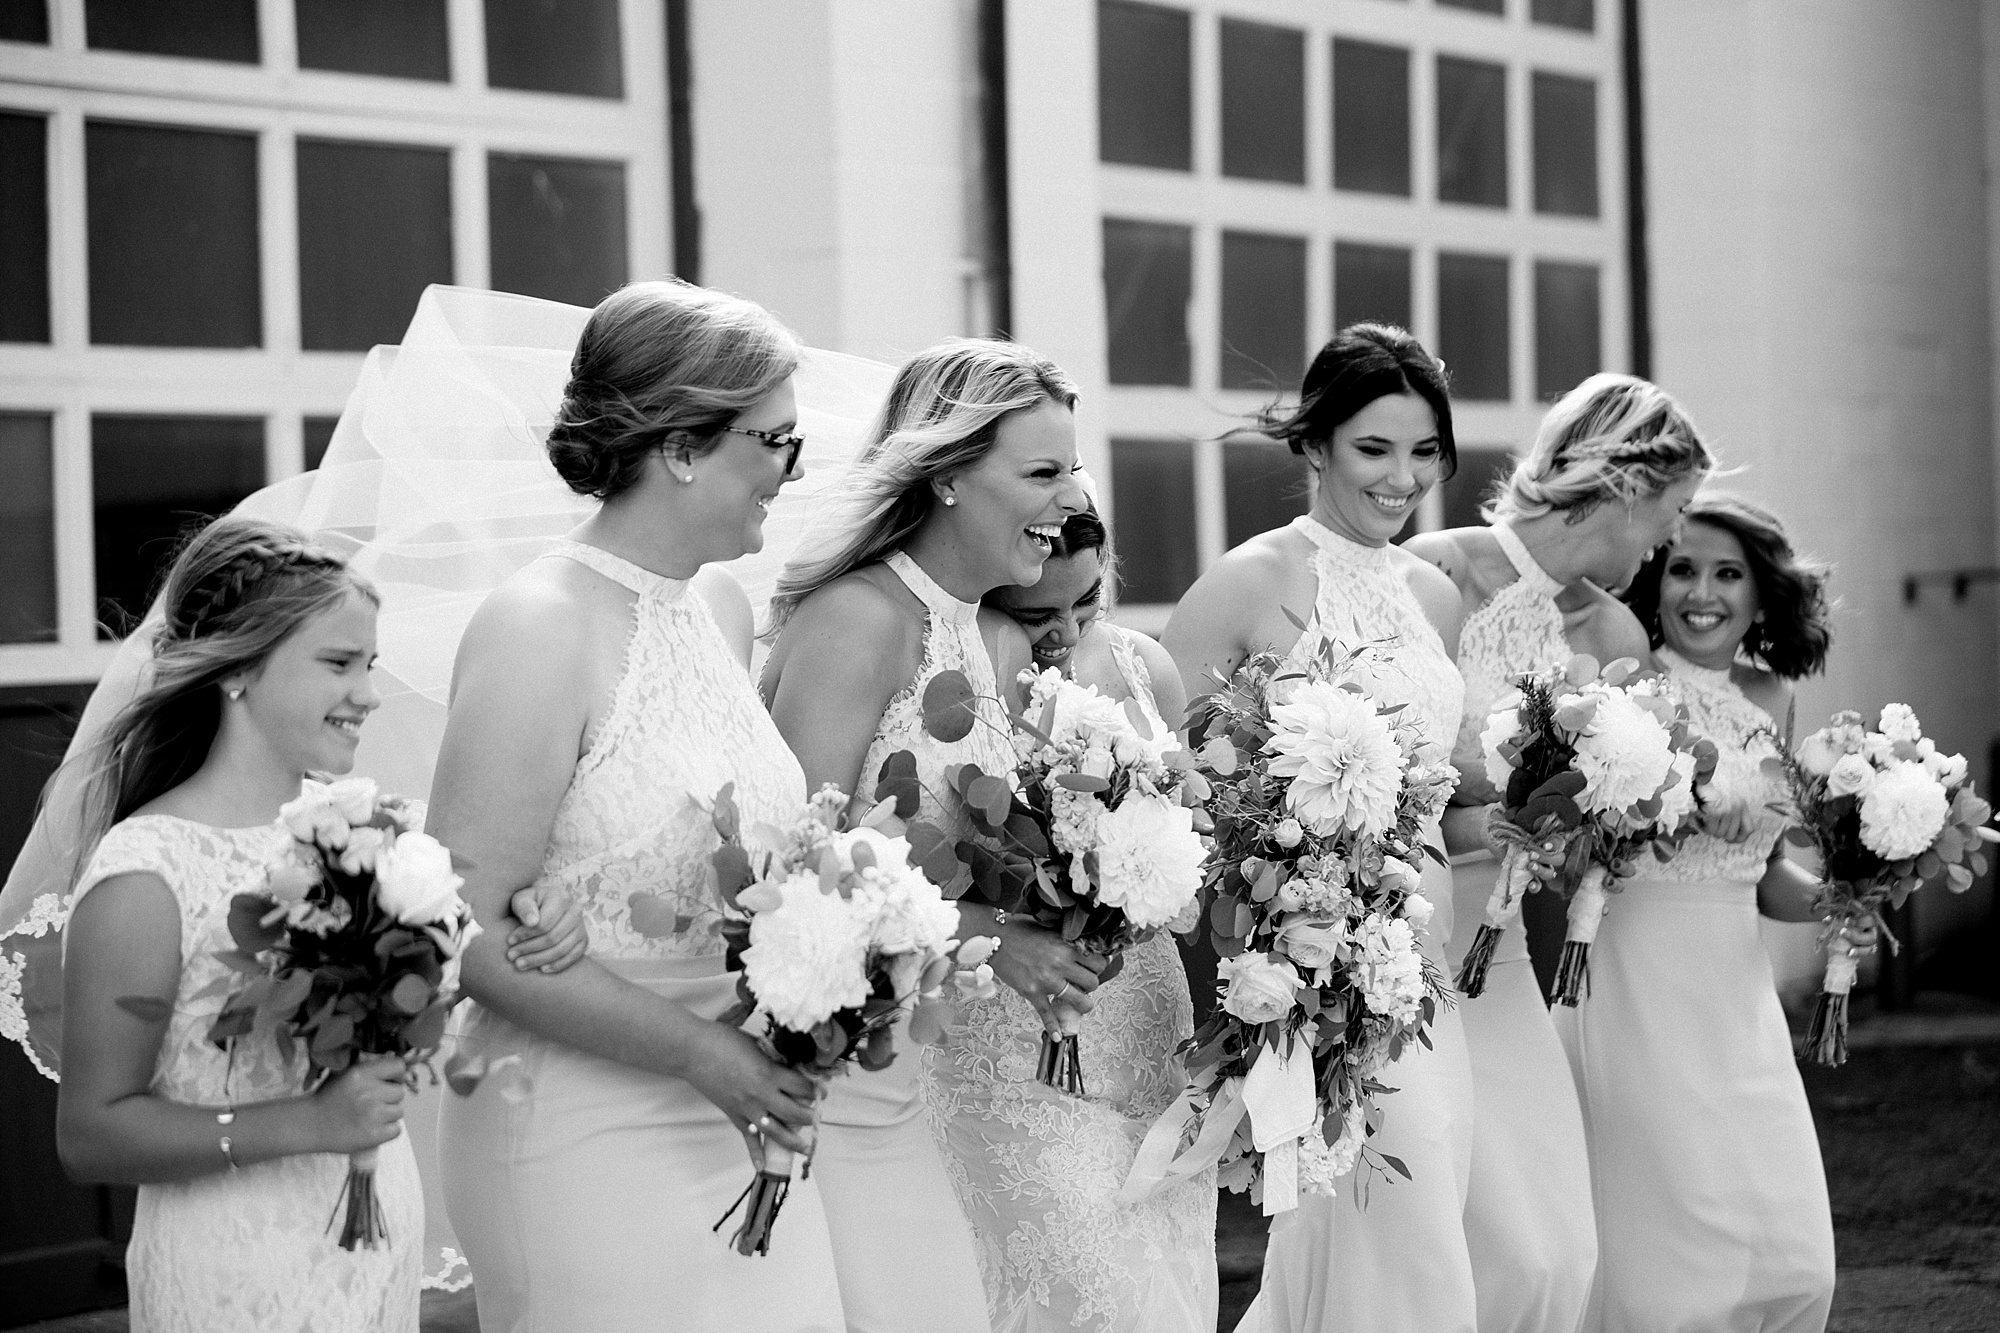 A classic blush and gold late summer wedding at Packard Proving Grounds in Shelby Township, Michigan by Breanne Rochelle Photography.